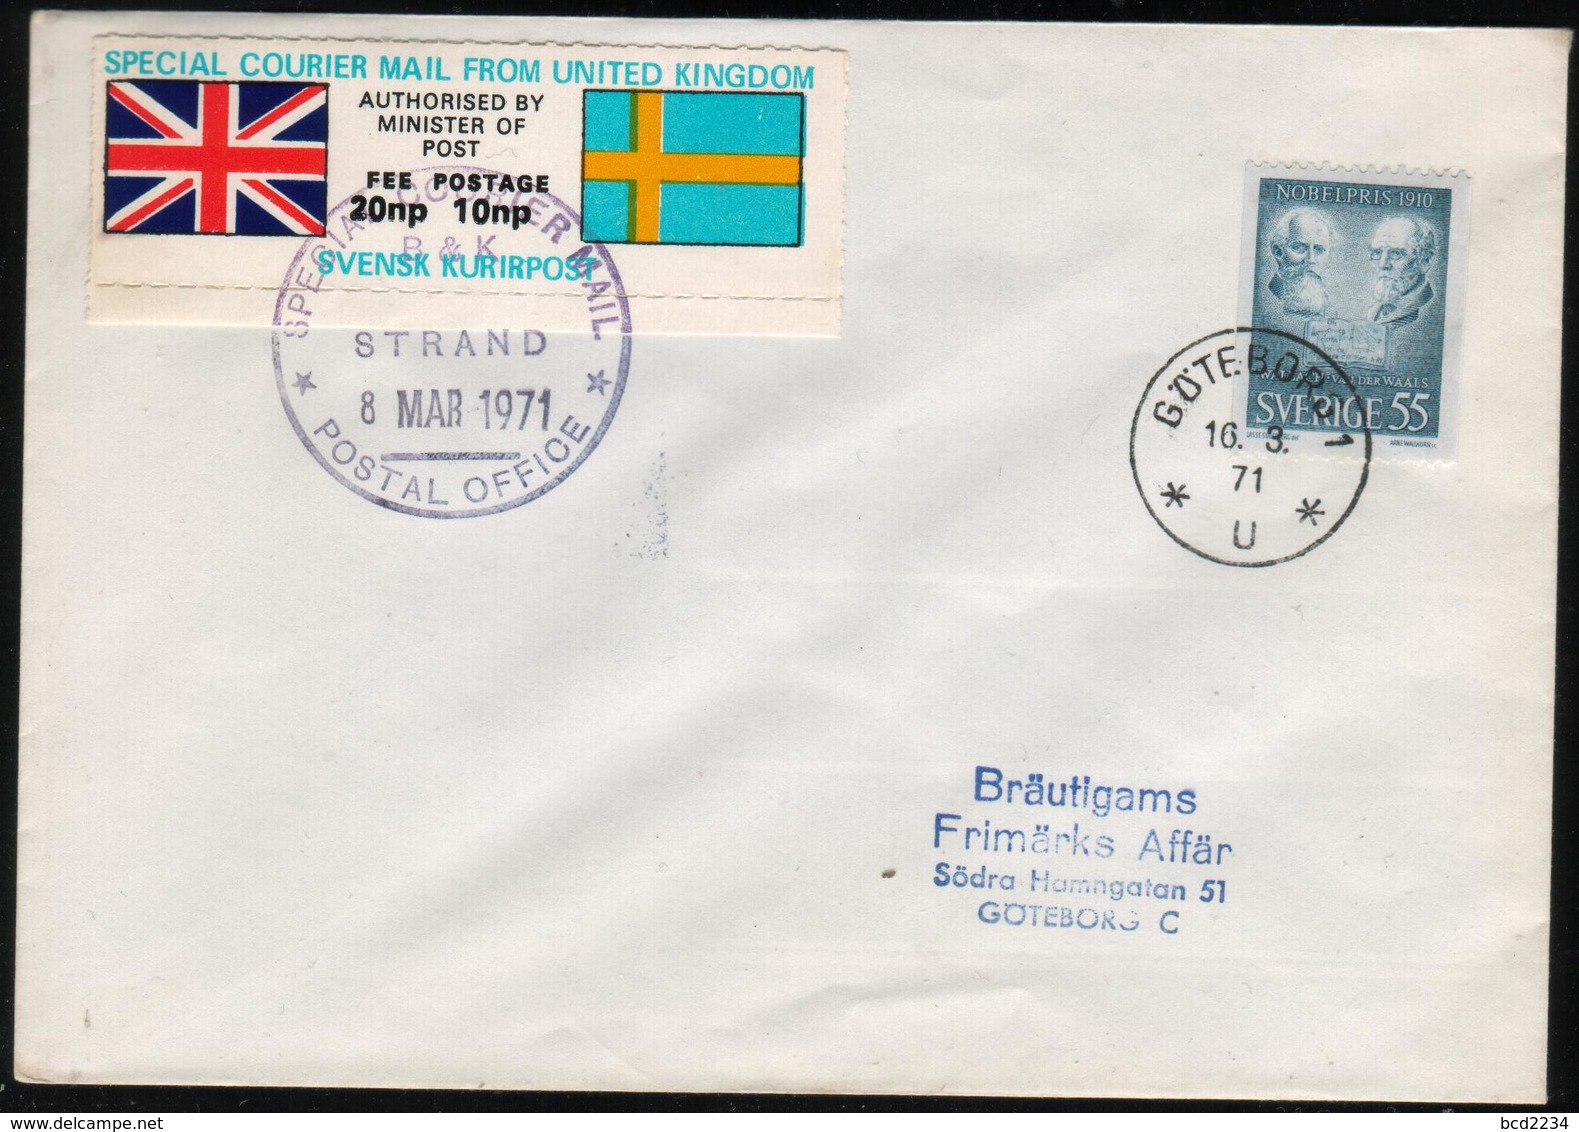 GREAT BRITAIN GB 1971 POSTAL STRIKE MAIL SPECIAL COURIER MAIL 2ND ISSUE DECIMAL COVER TO GOTEBORG SWEDEN 8 MARCH - Variedades Y Curiosidades